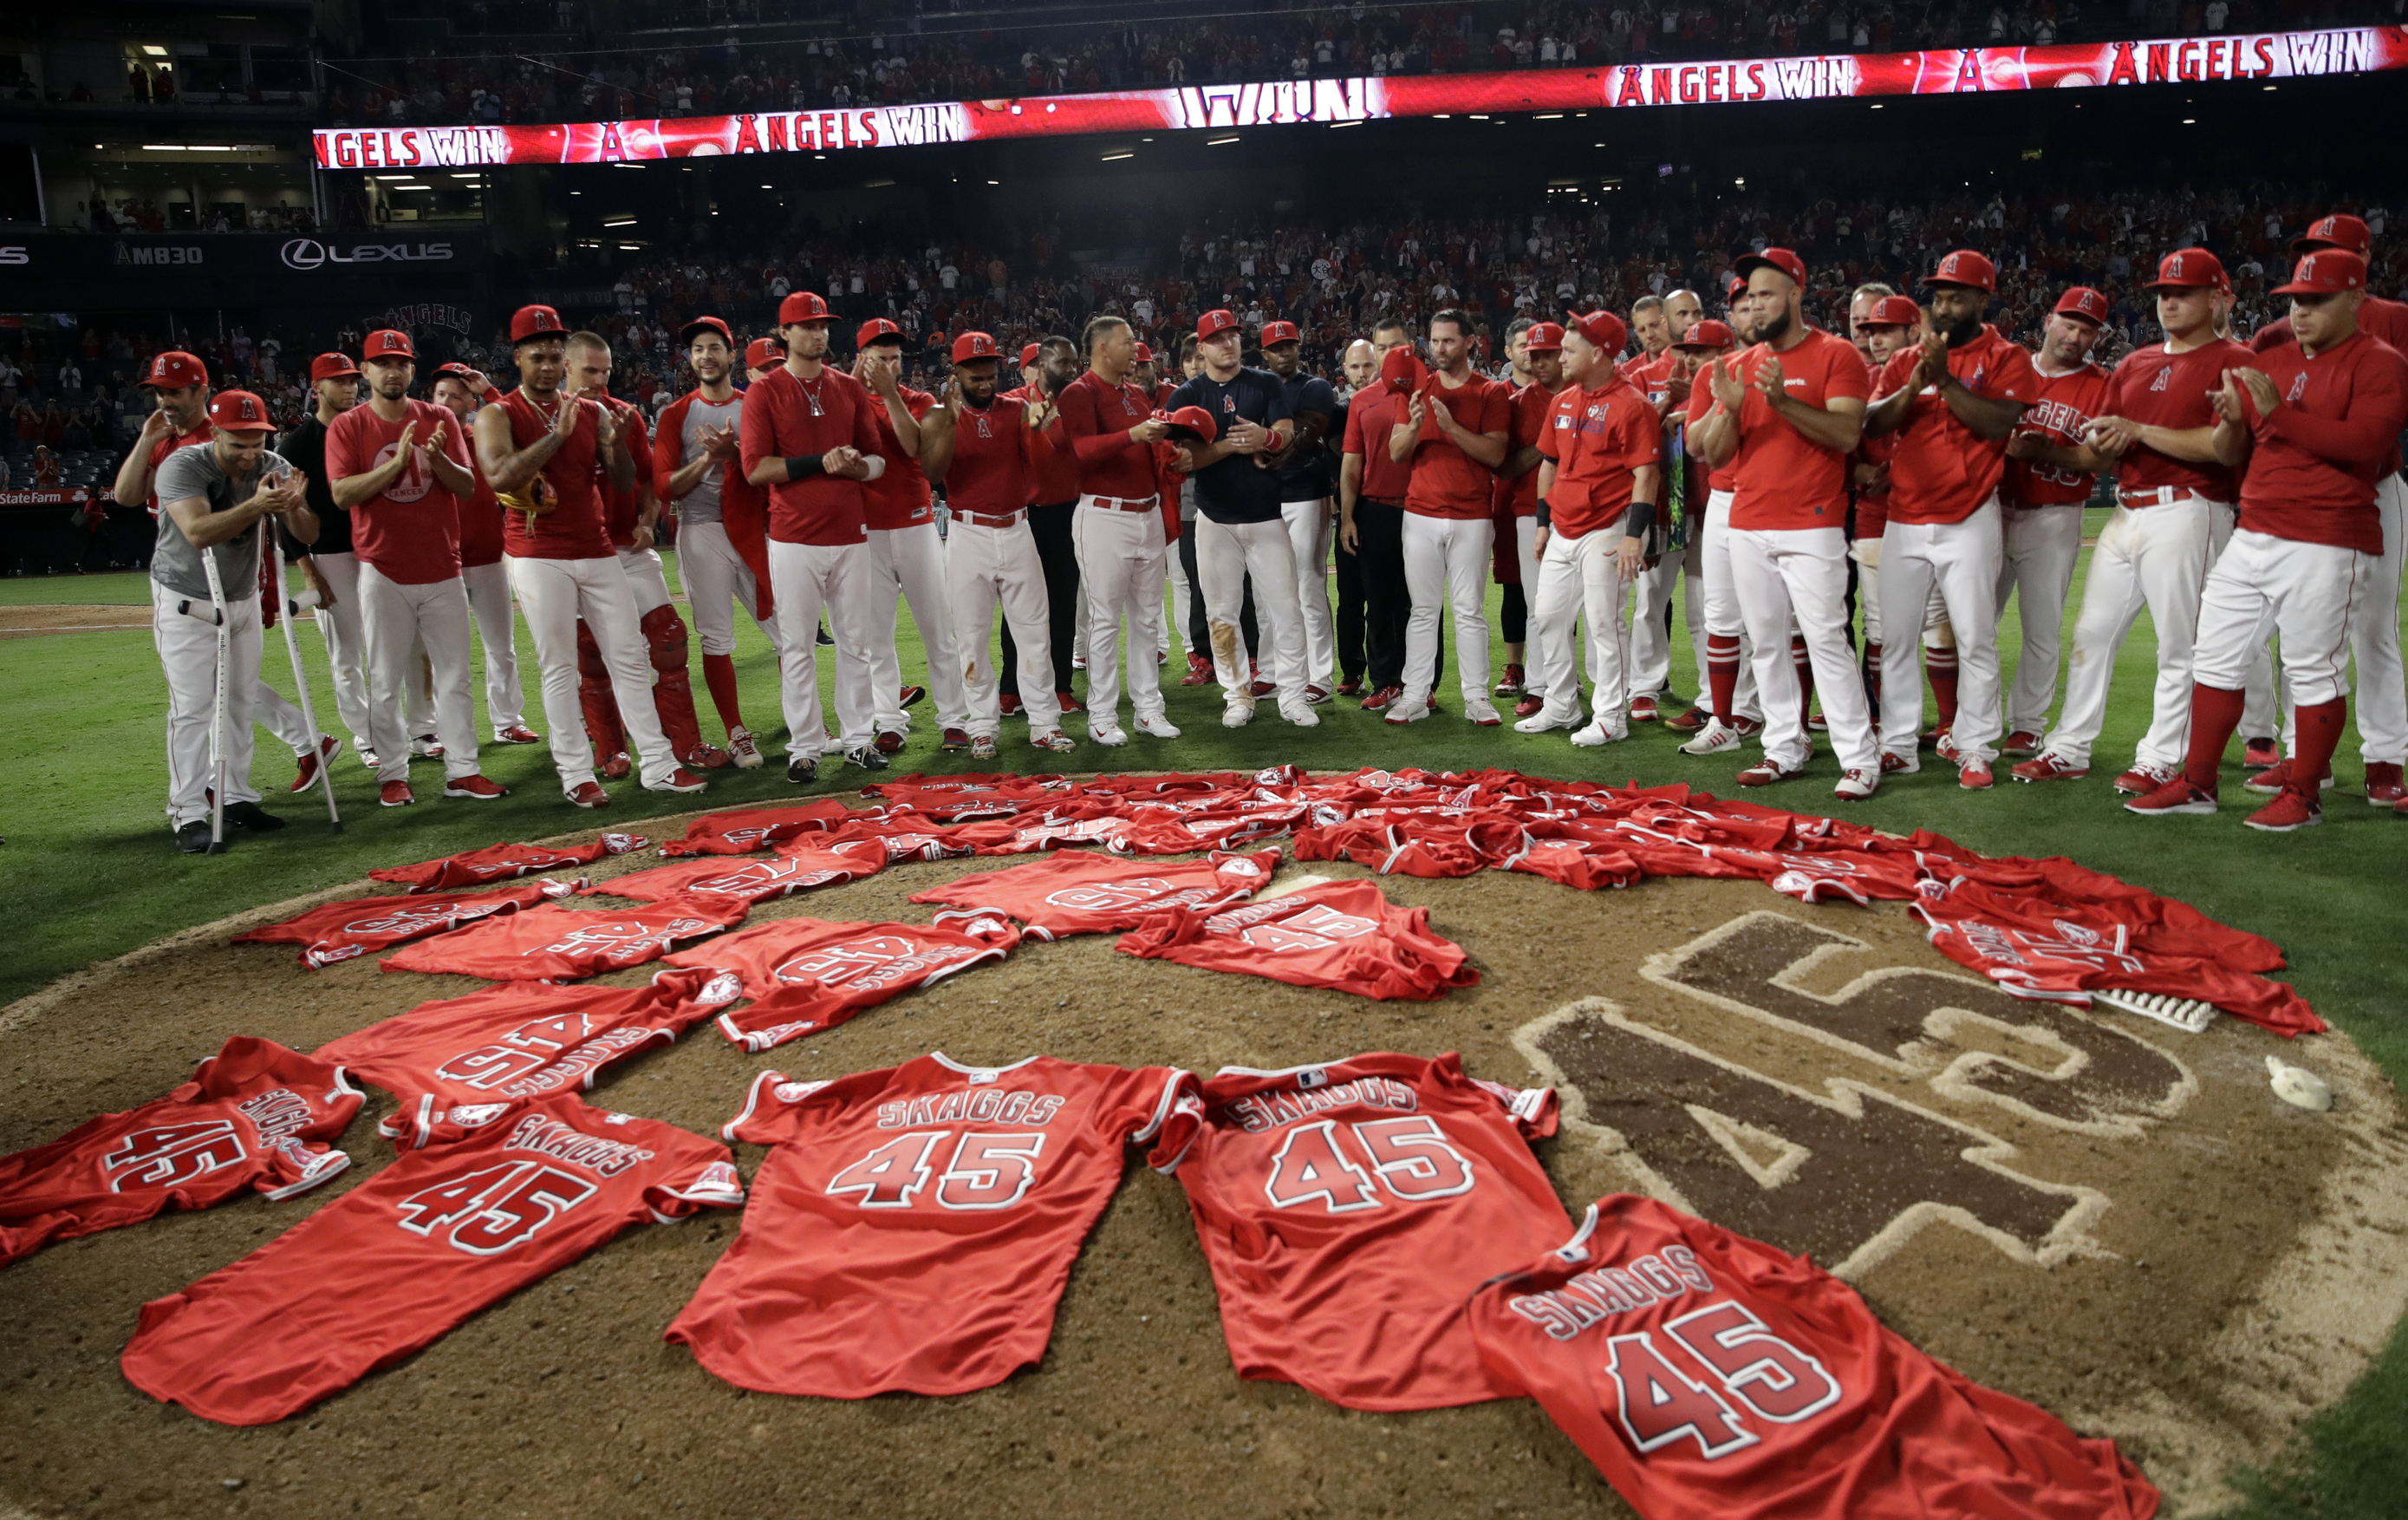 We're playing for him: Angels honor Skaggs with amazing game